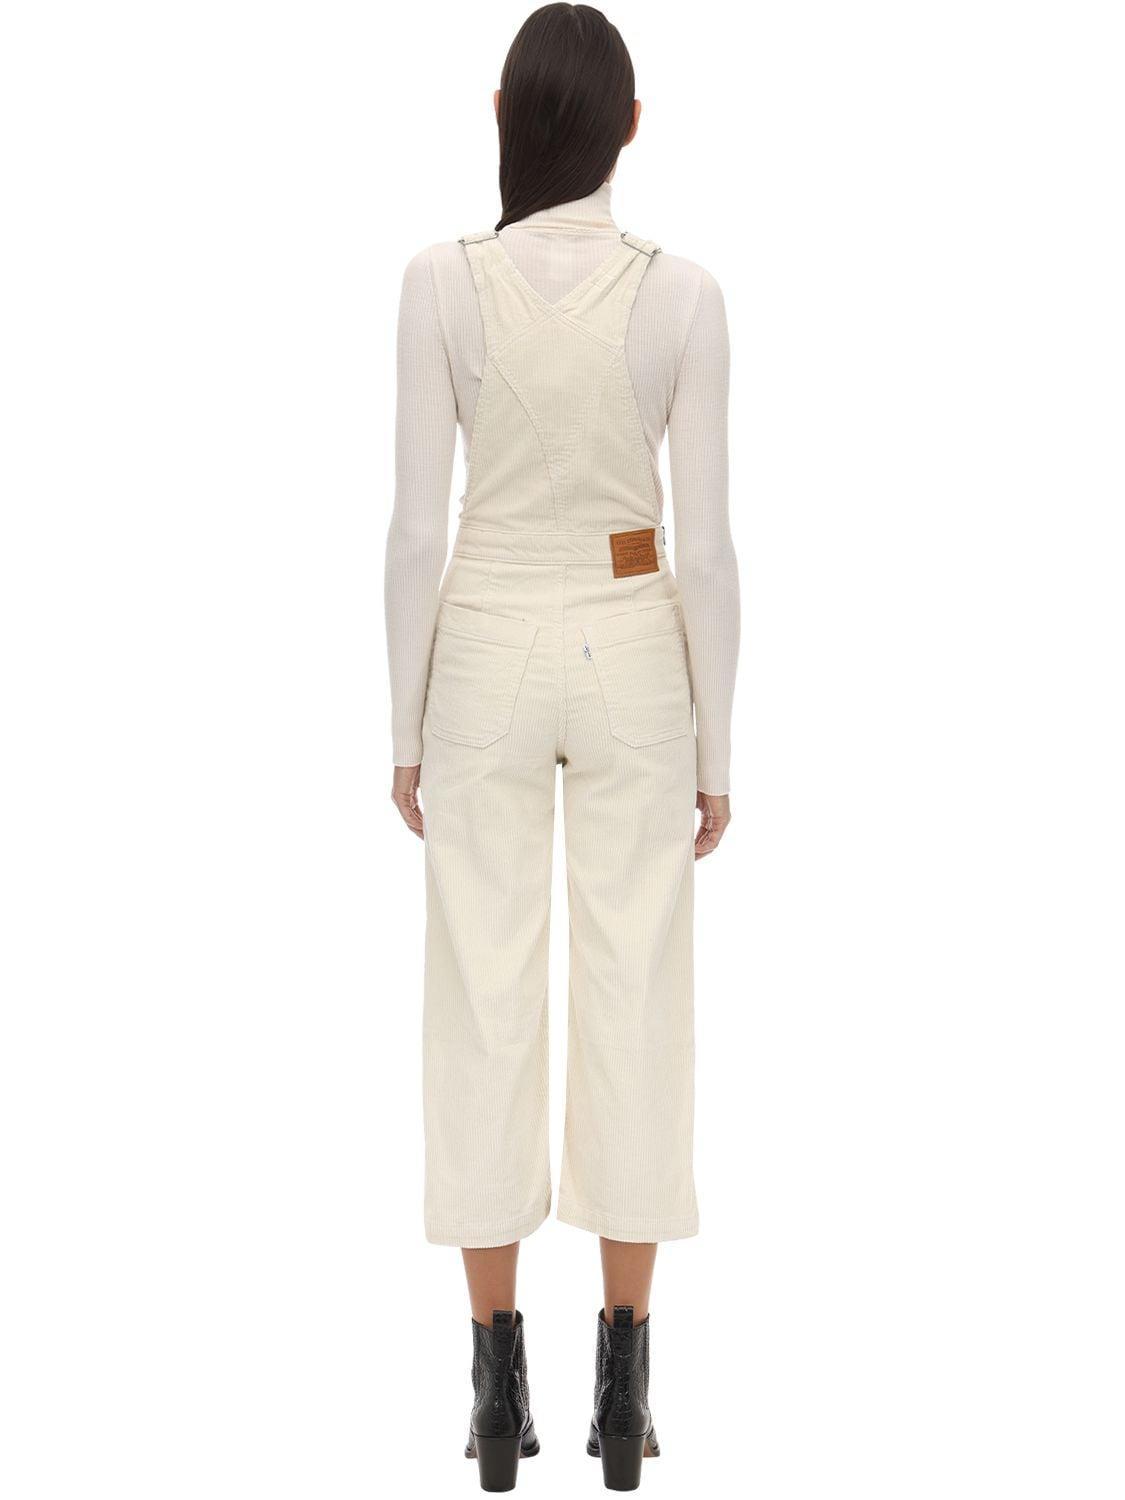 Levi's Cropped Wide Leg Corduroy Jumpsuit in Ivory (White) - Lyst